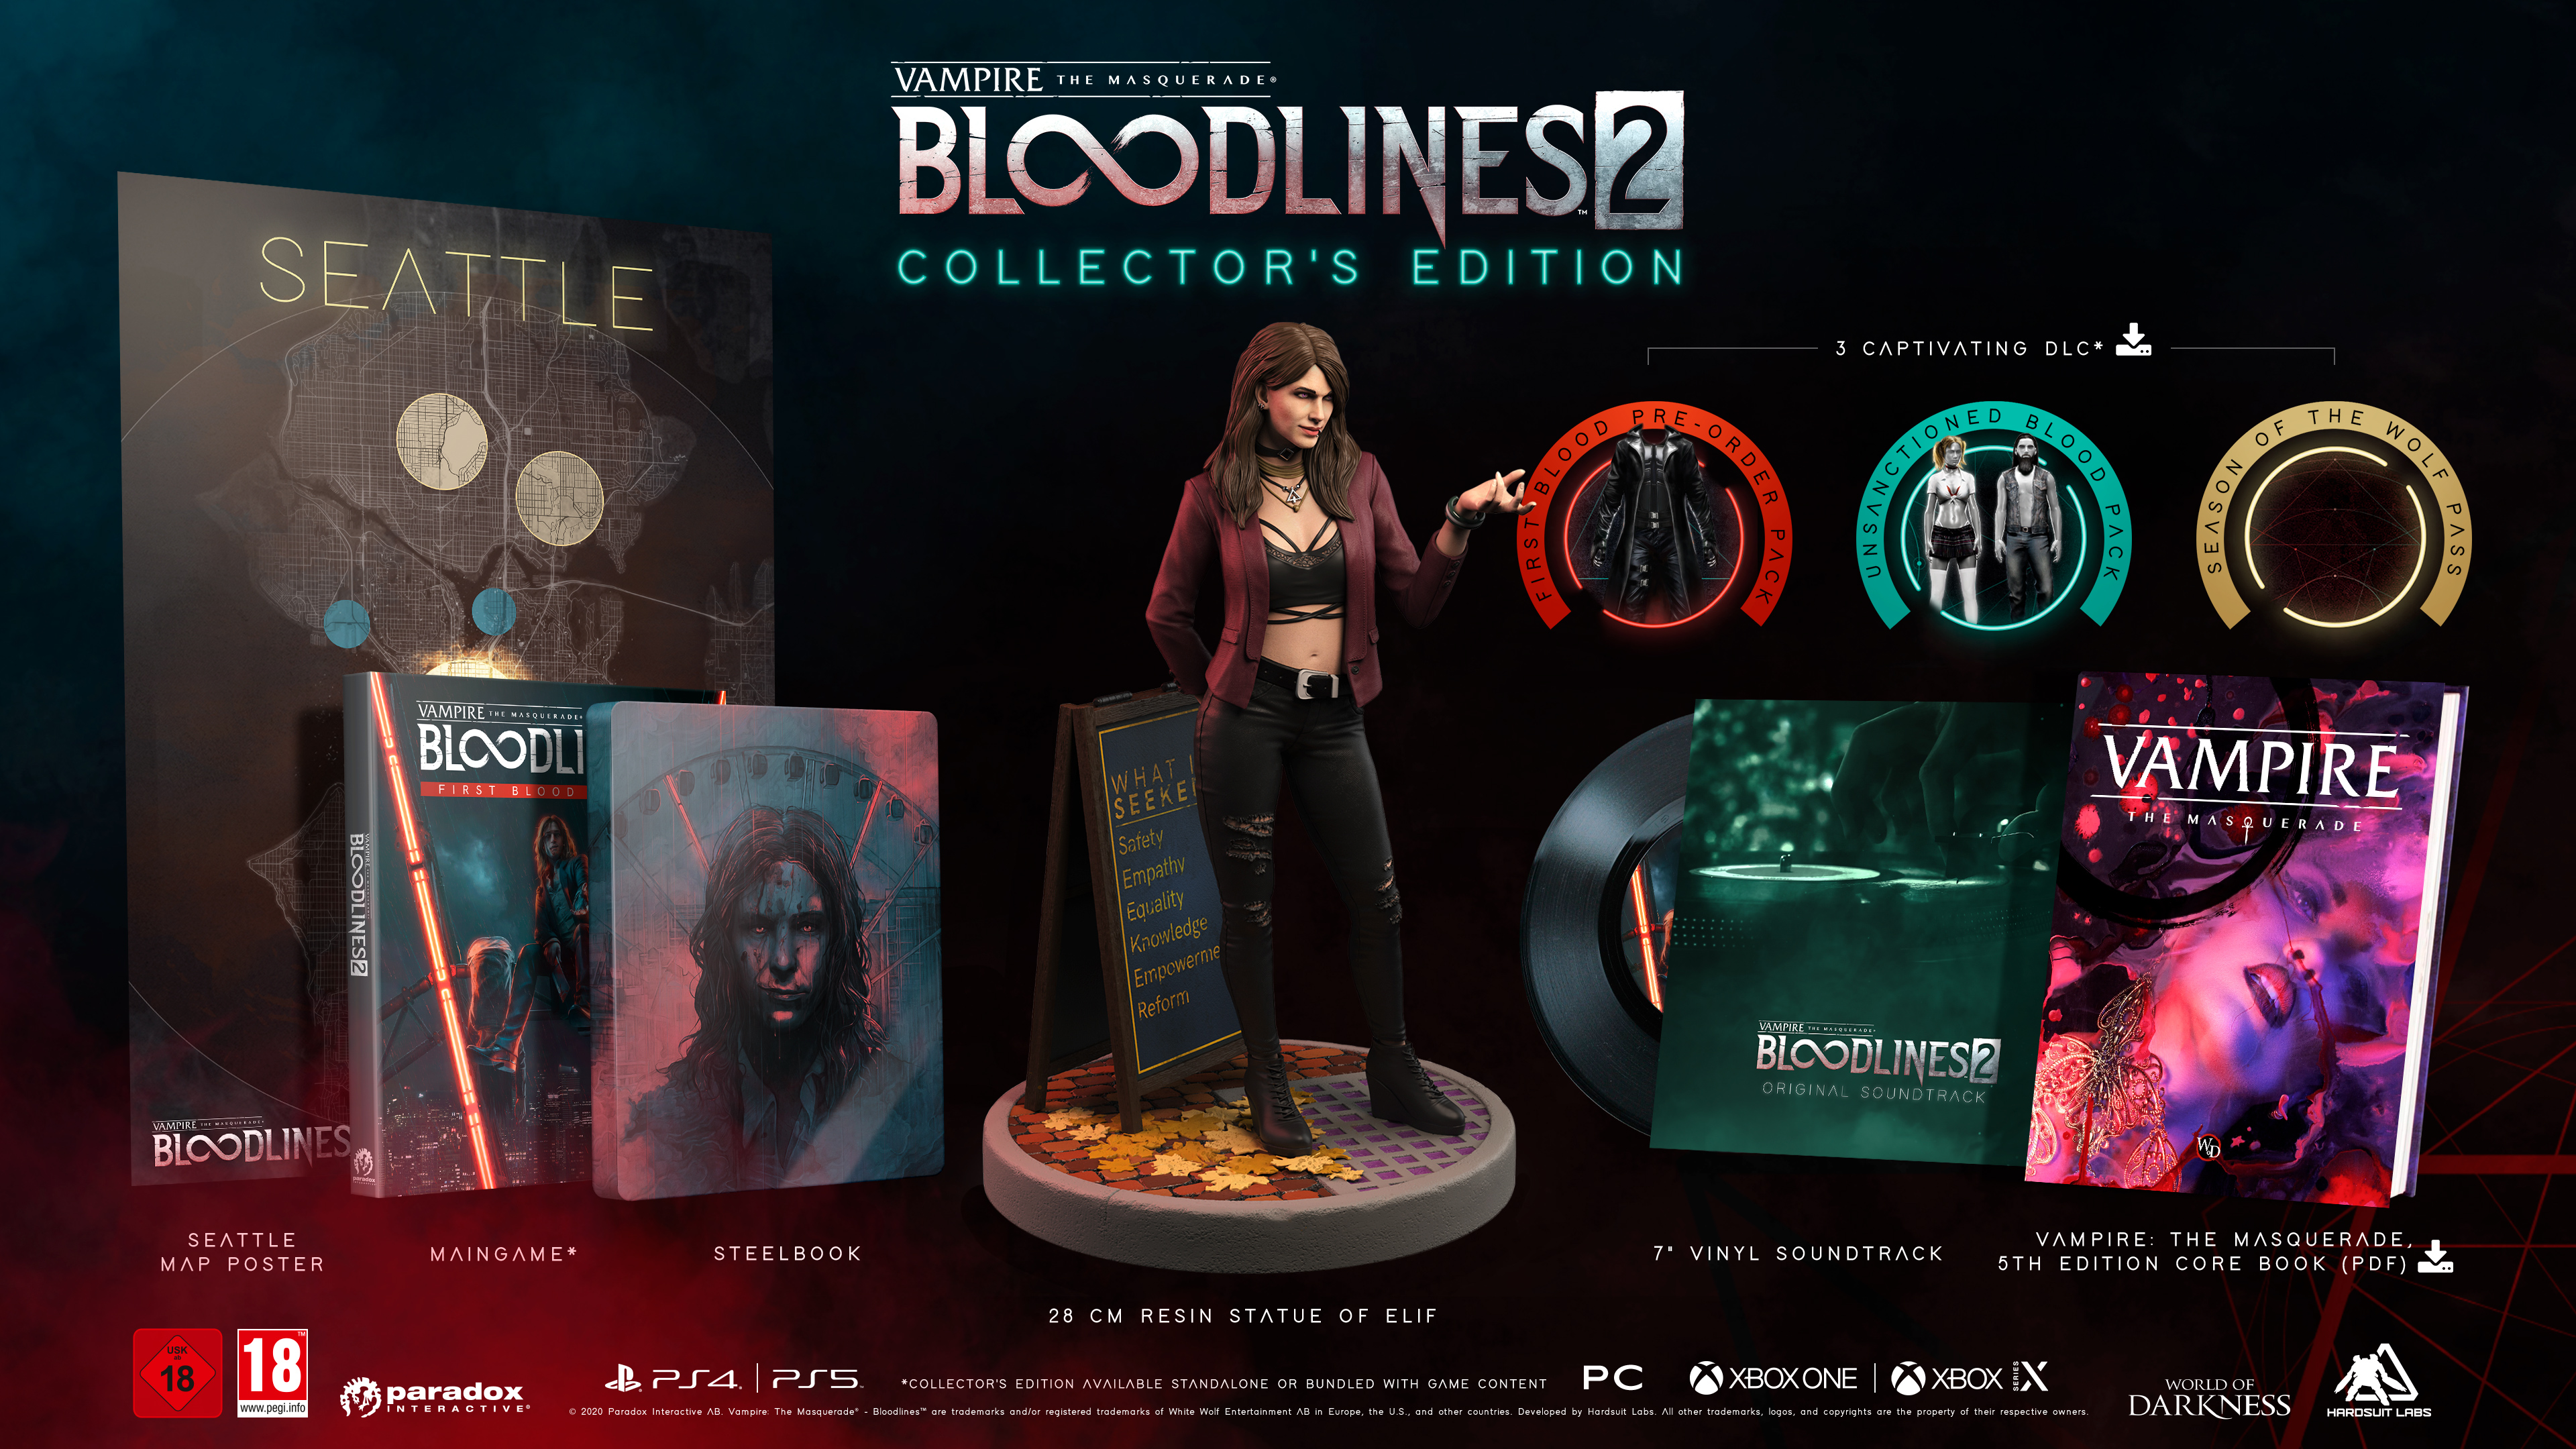 Unreal Engine 5-powered Vampire: The Masquerade - Bloodlines 2